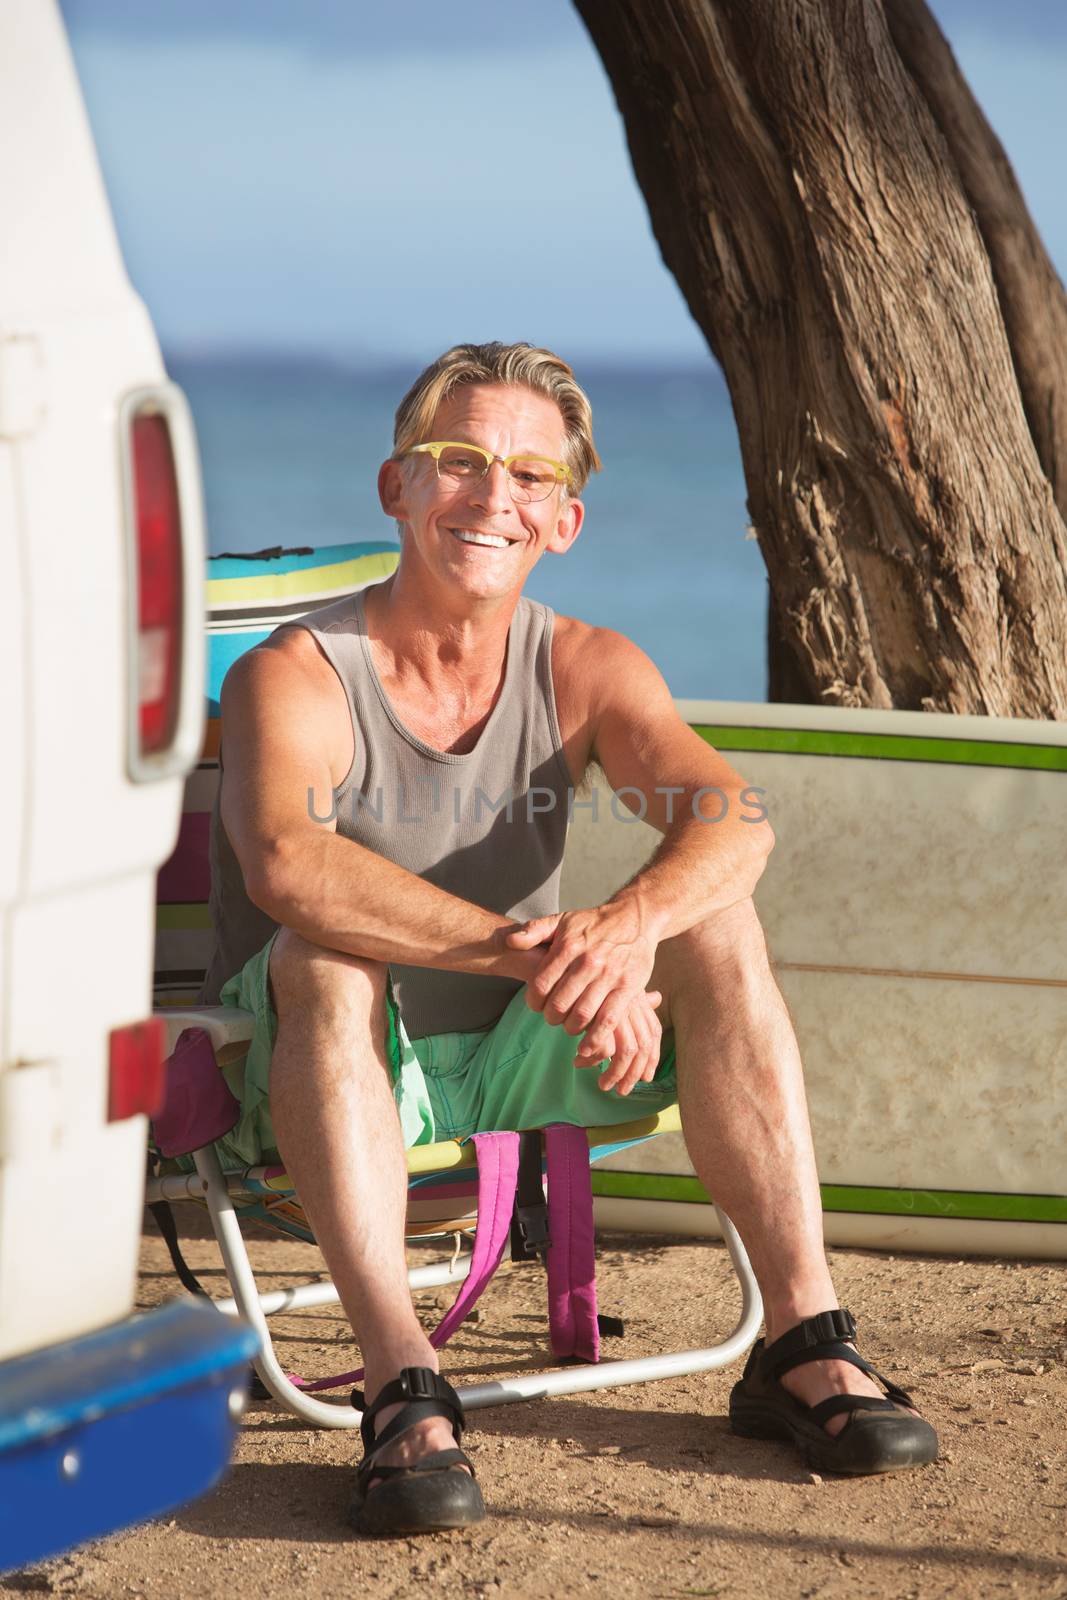 Smiling Adult Sitting with Surfboard by Creatista